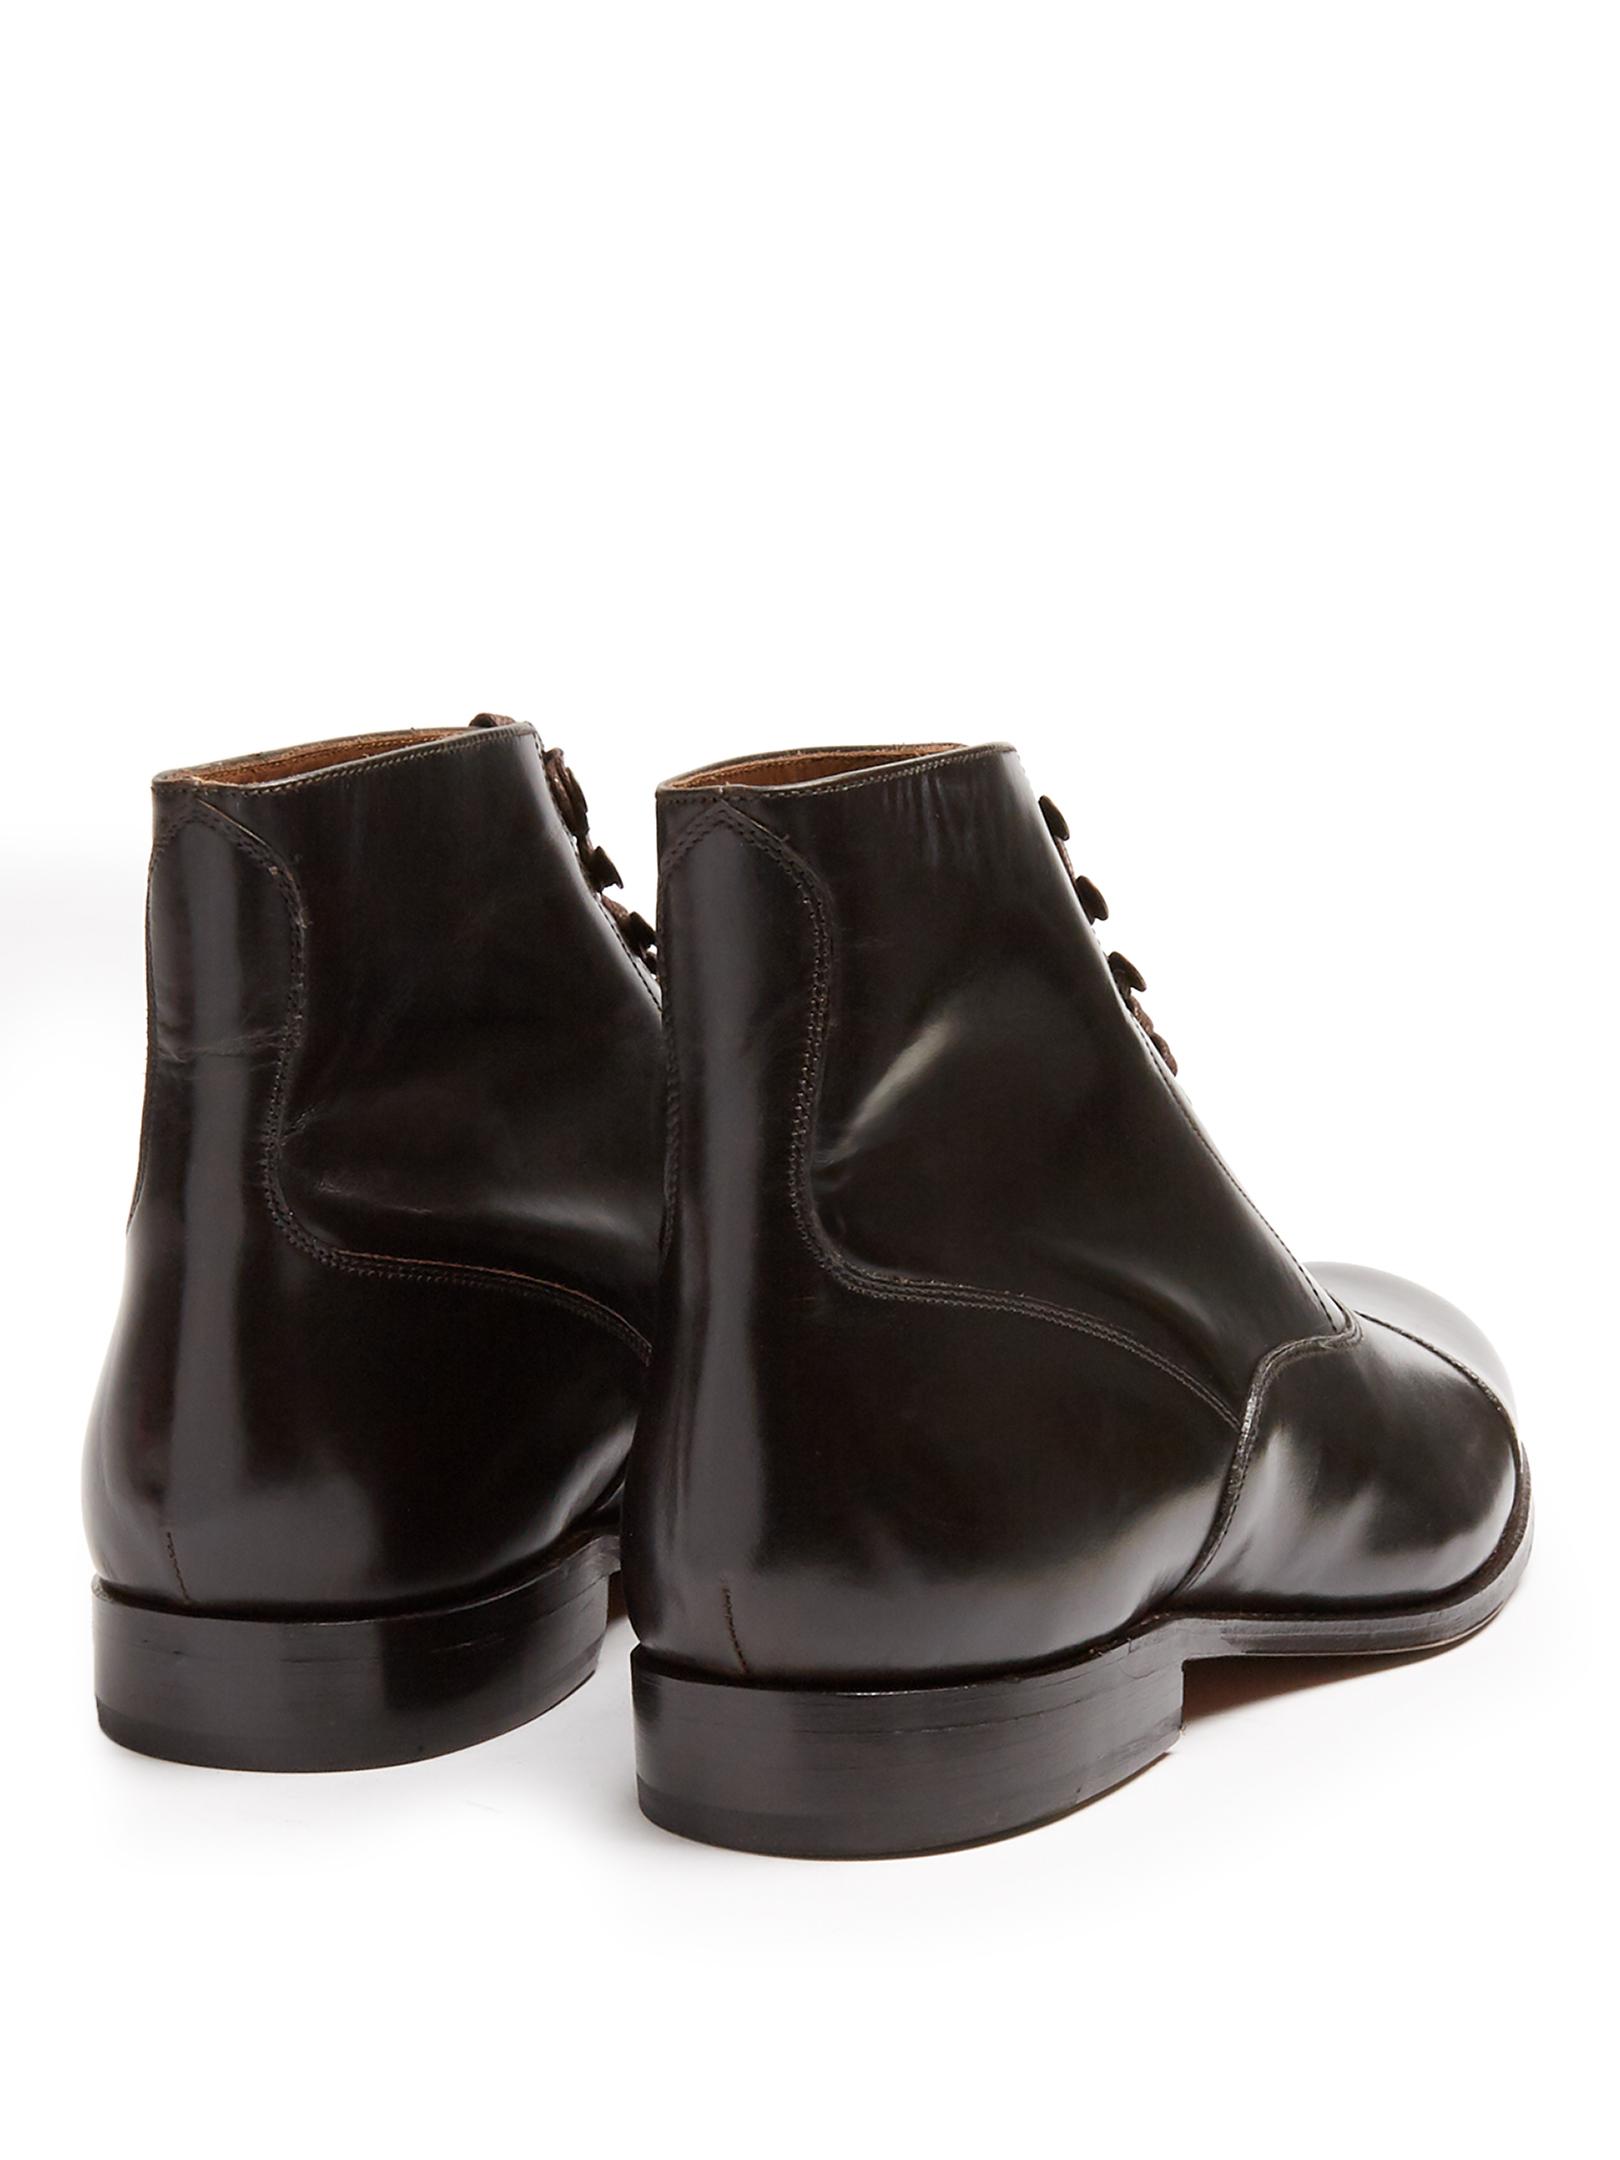 Lyst - Grenson Leander Leather Ankle Boots in Brown for Men